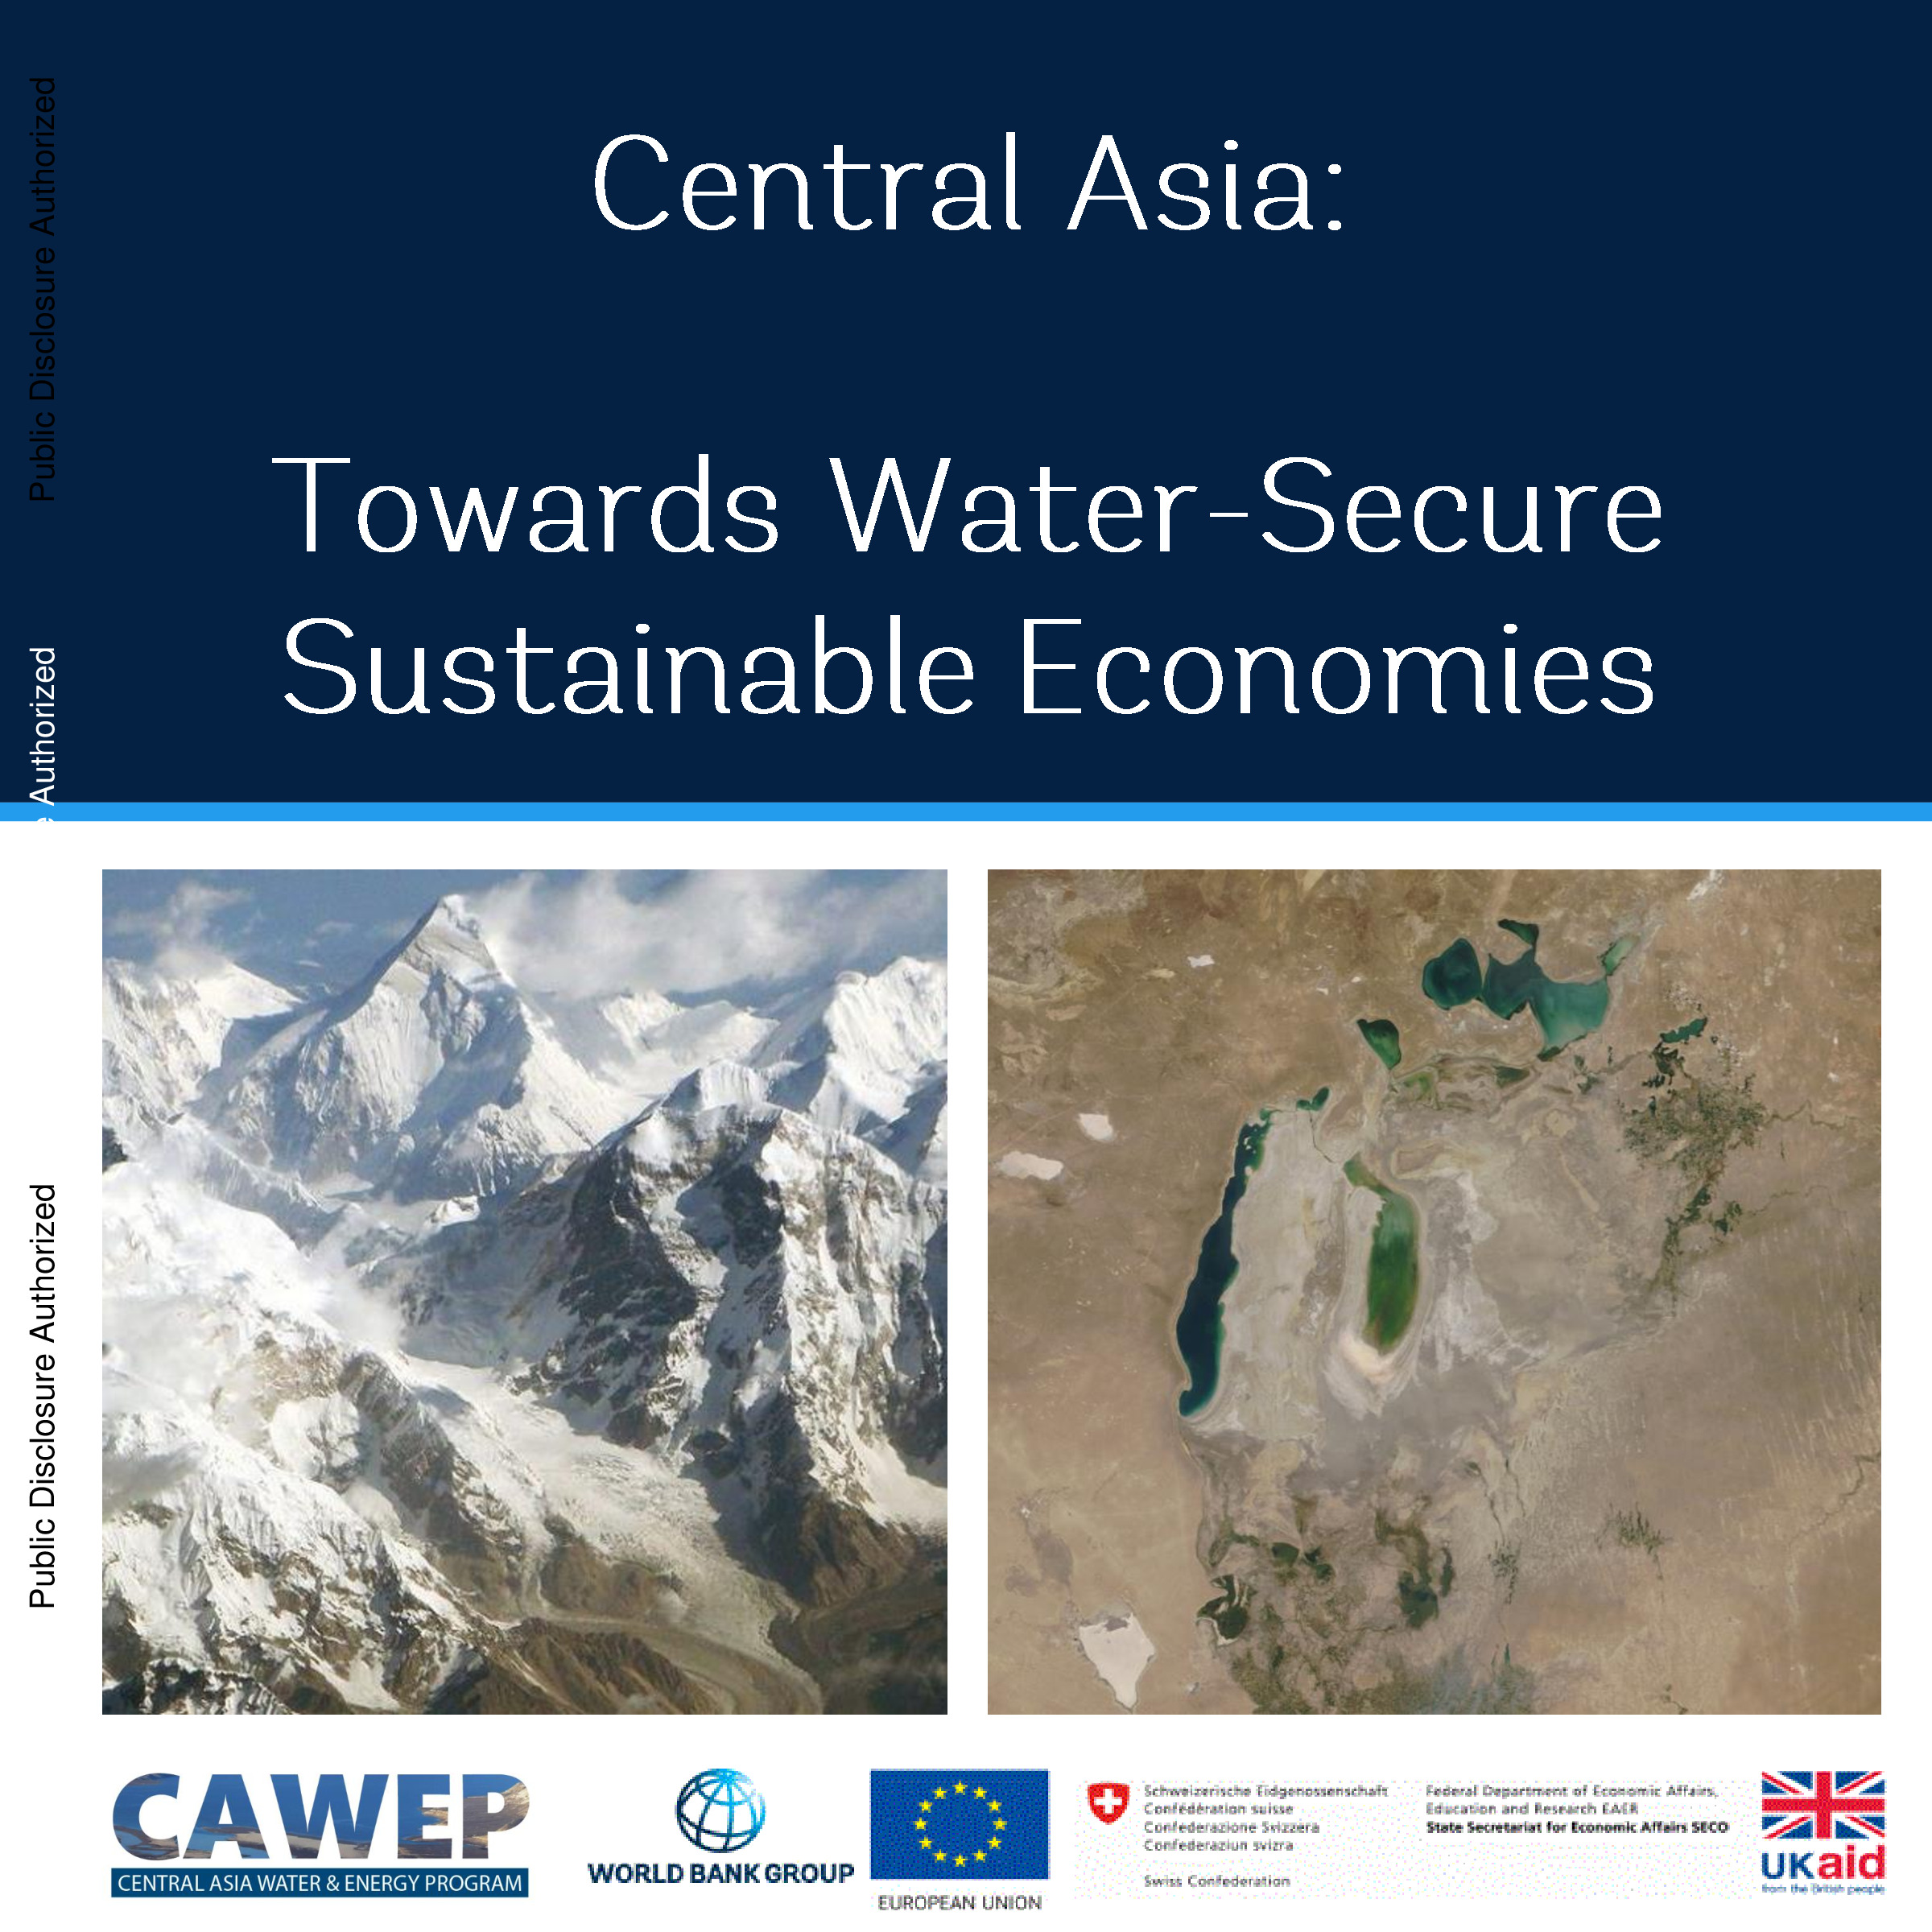 Central Asia: Towards Water-Secure Sustainable Economies